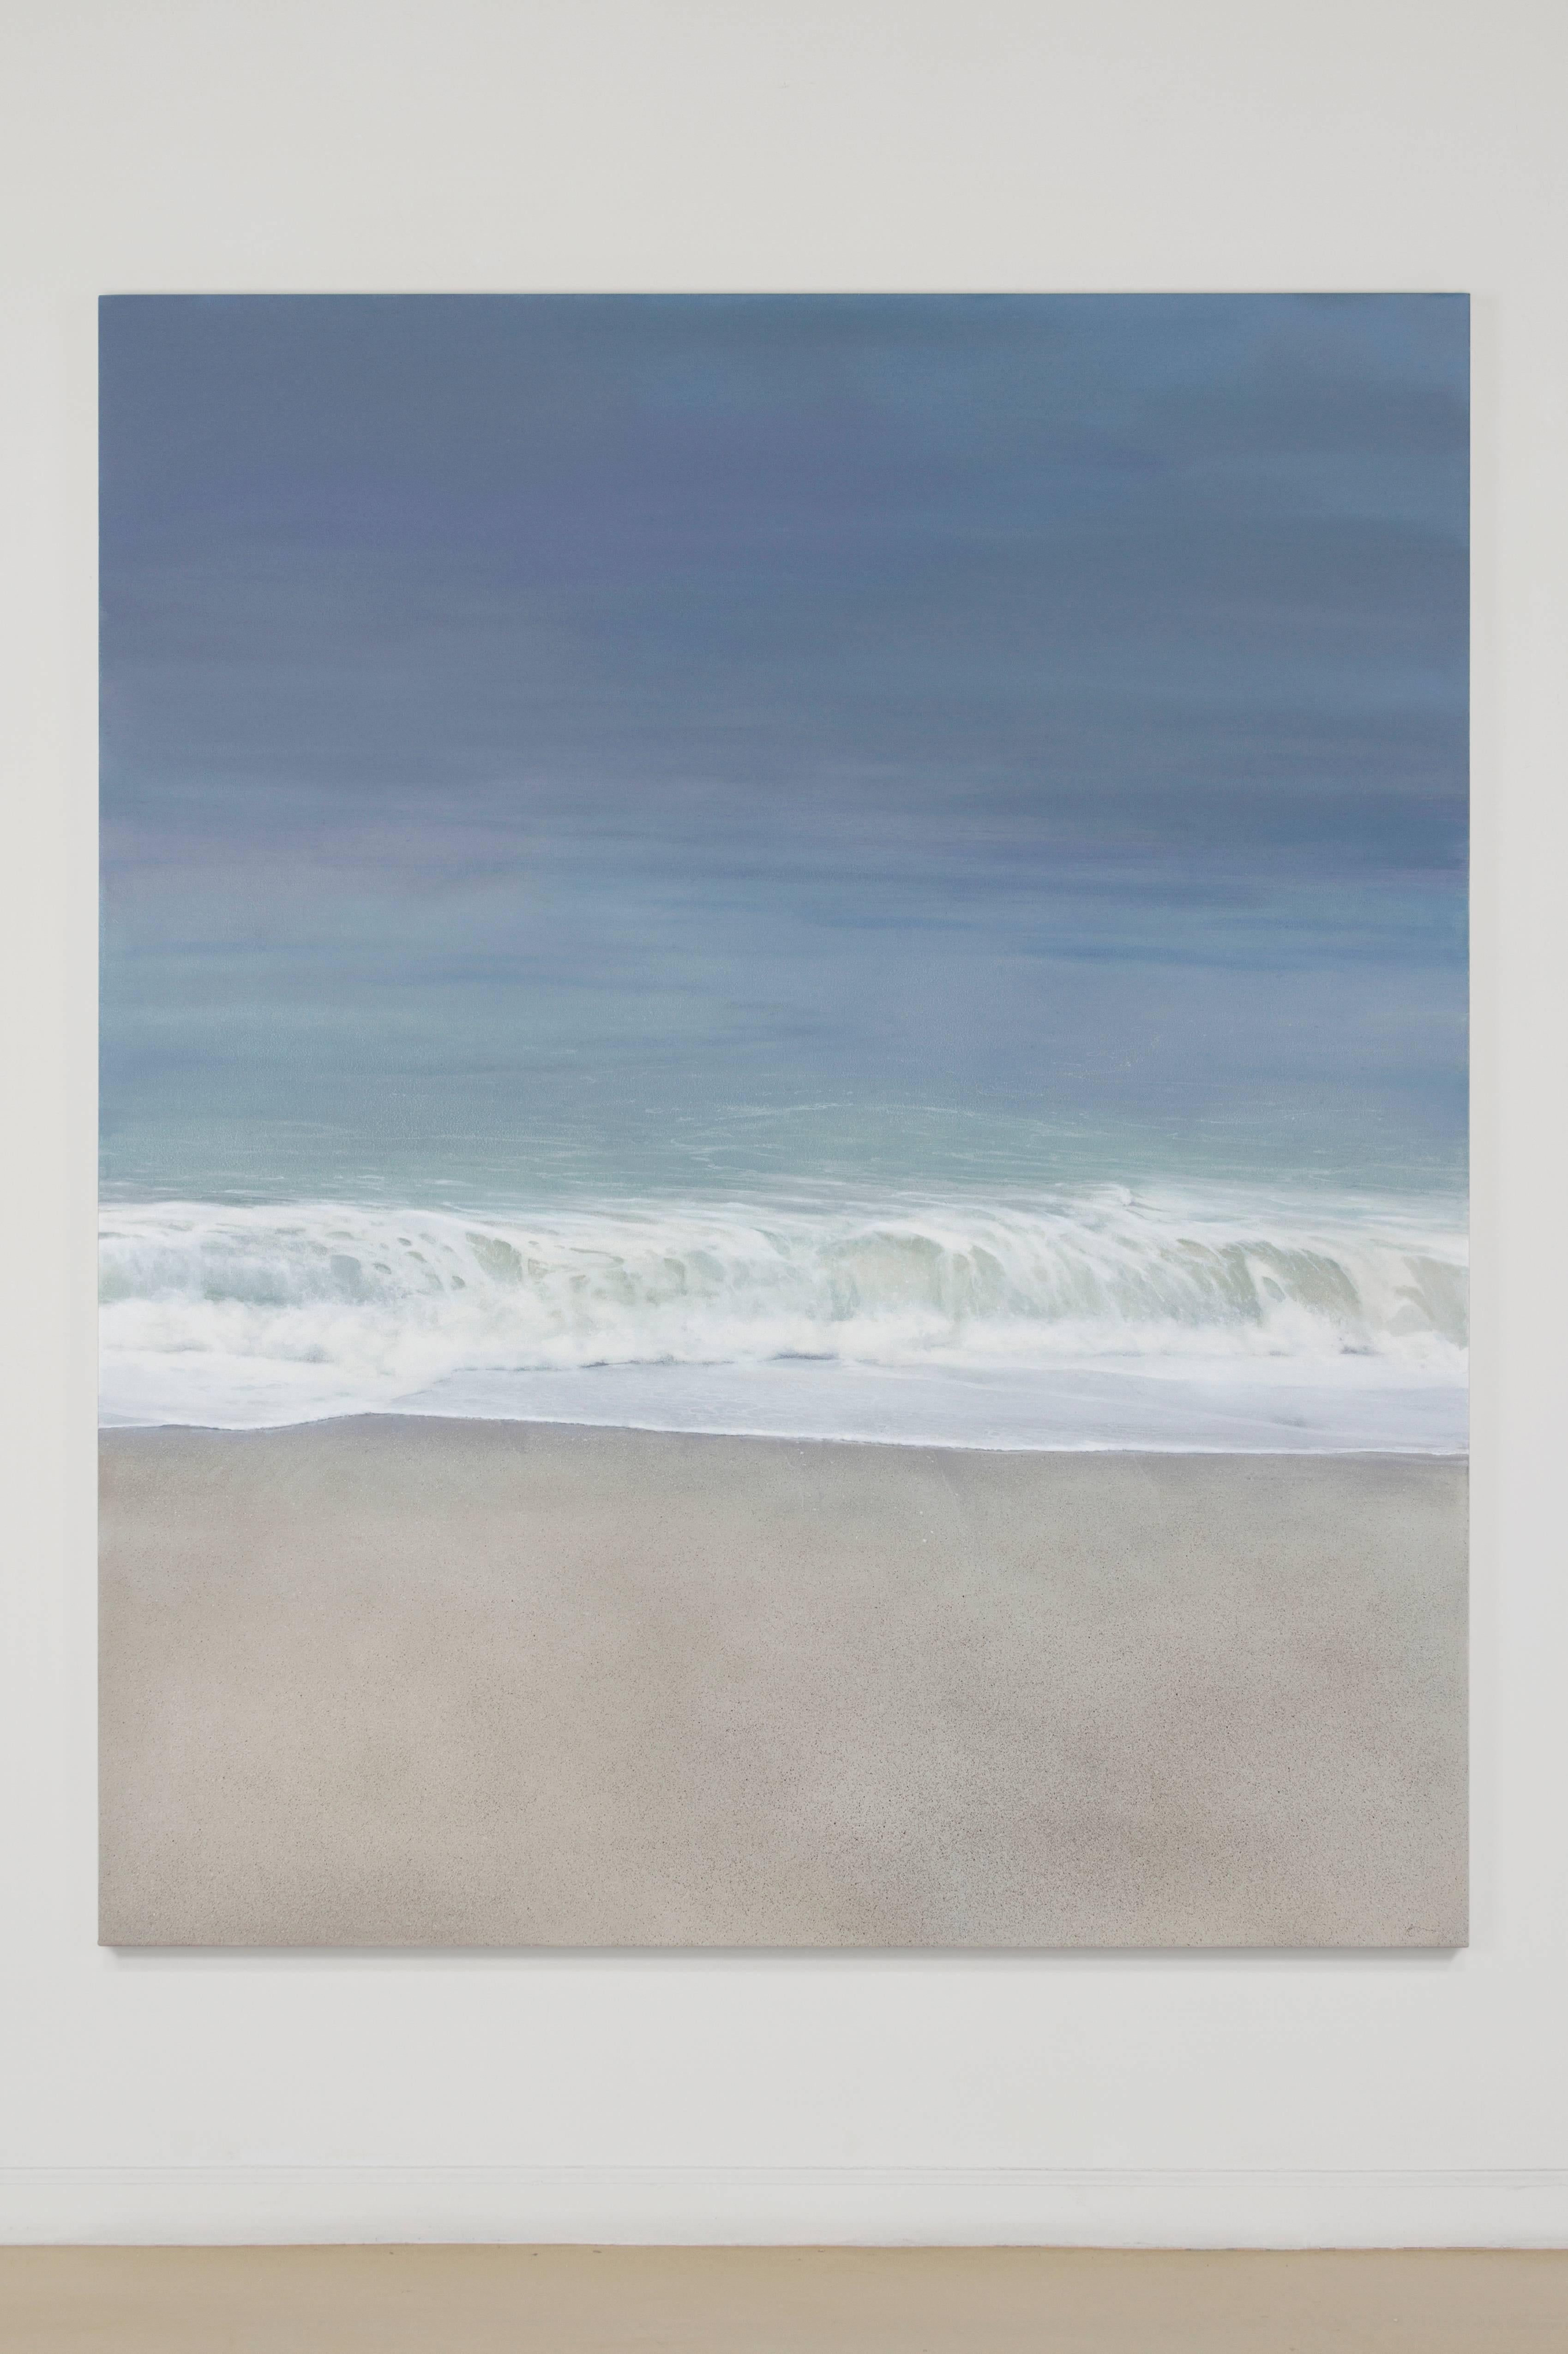 AMBIENT SURF, waves, beach, coastline, sand, muted colors, photo-realism - Painting by Todd Kenyon